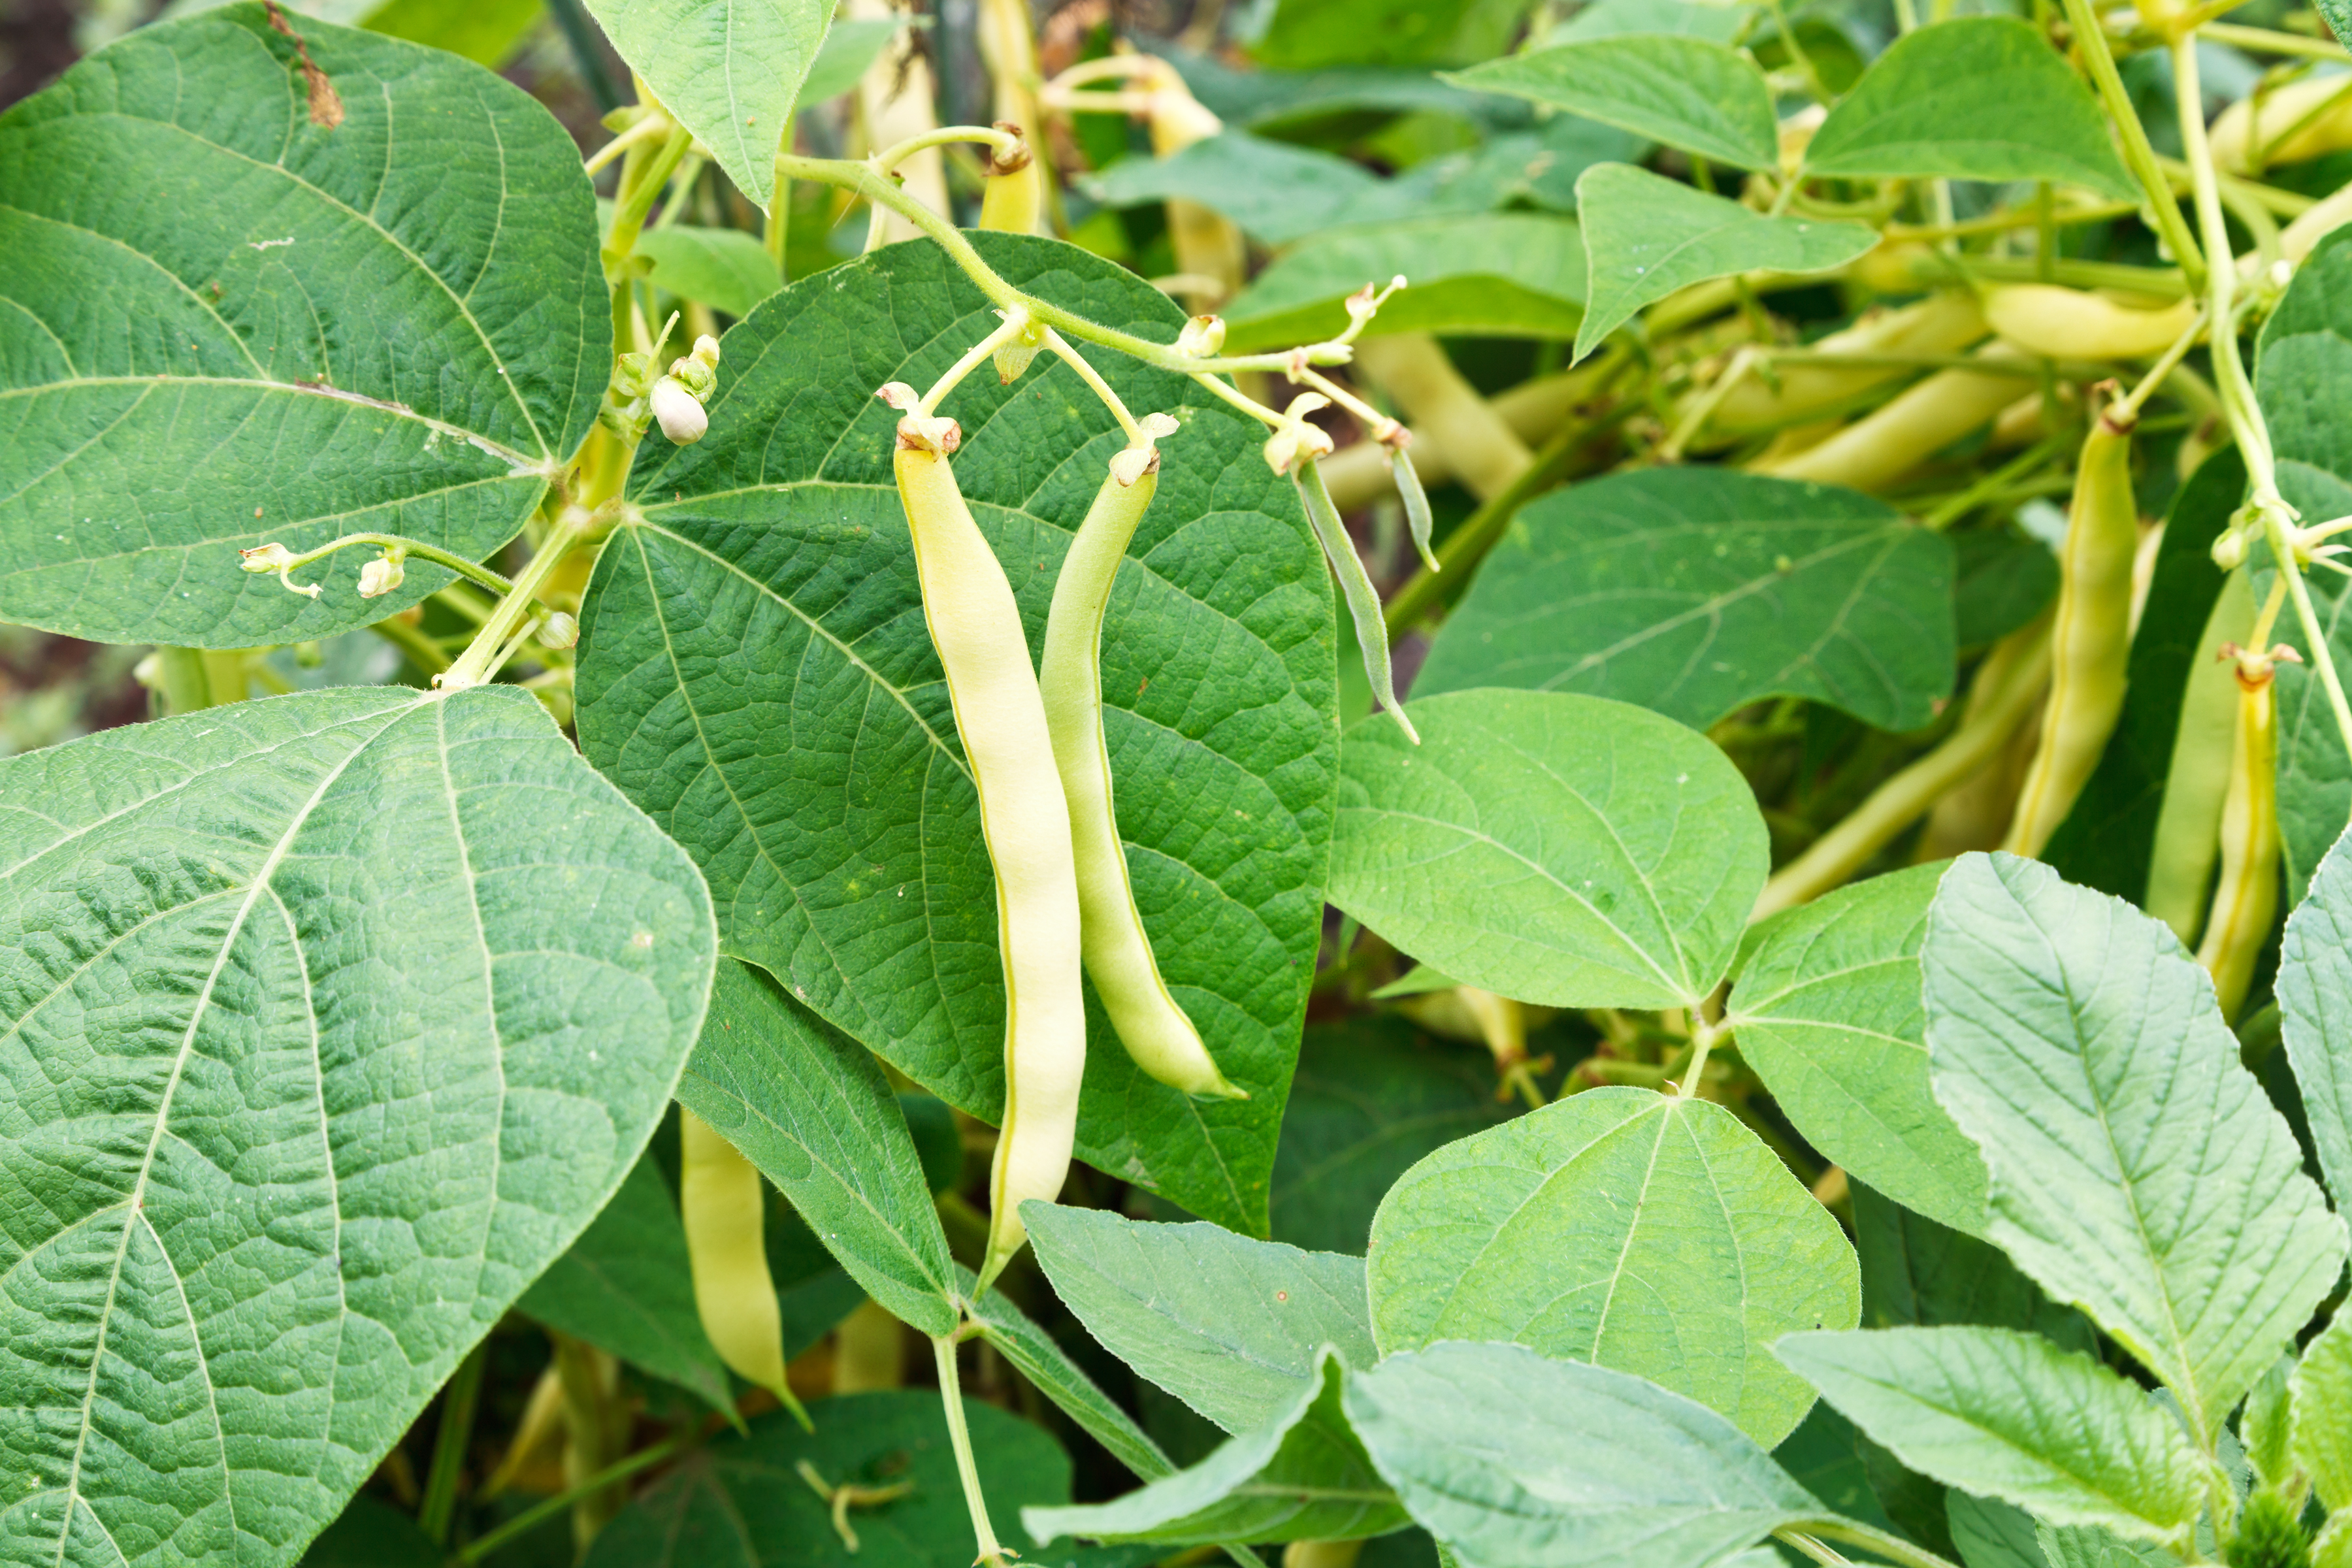 Bean plants with yellow bean pods